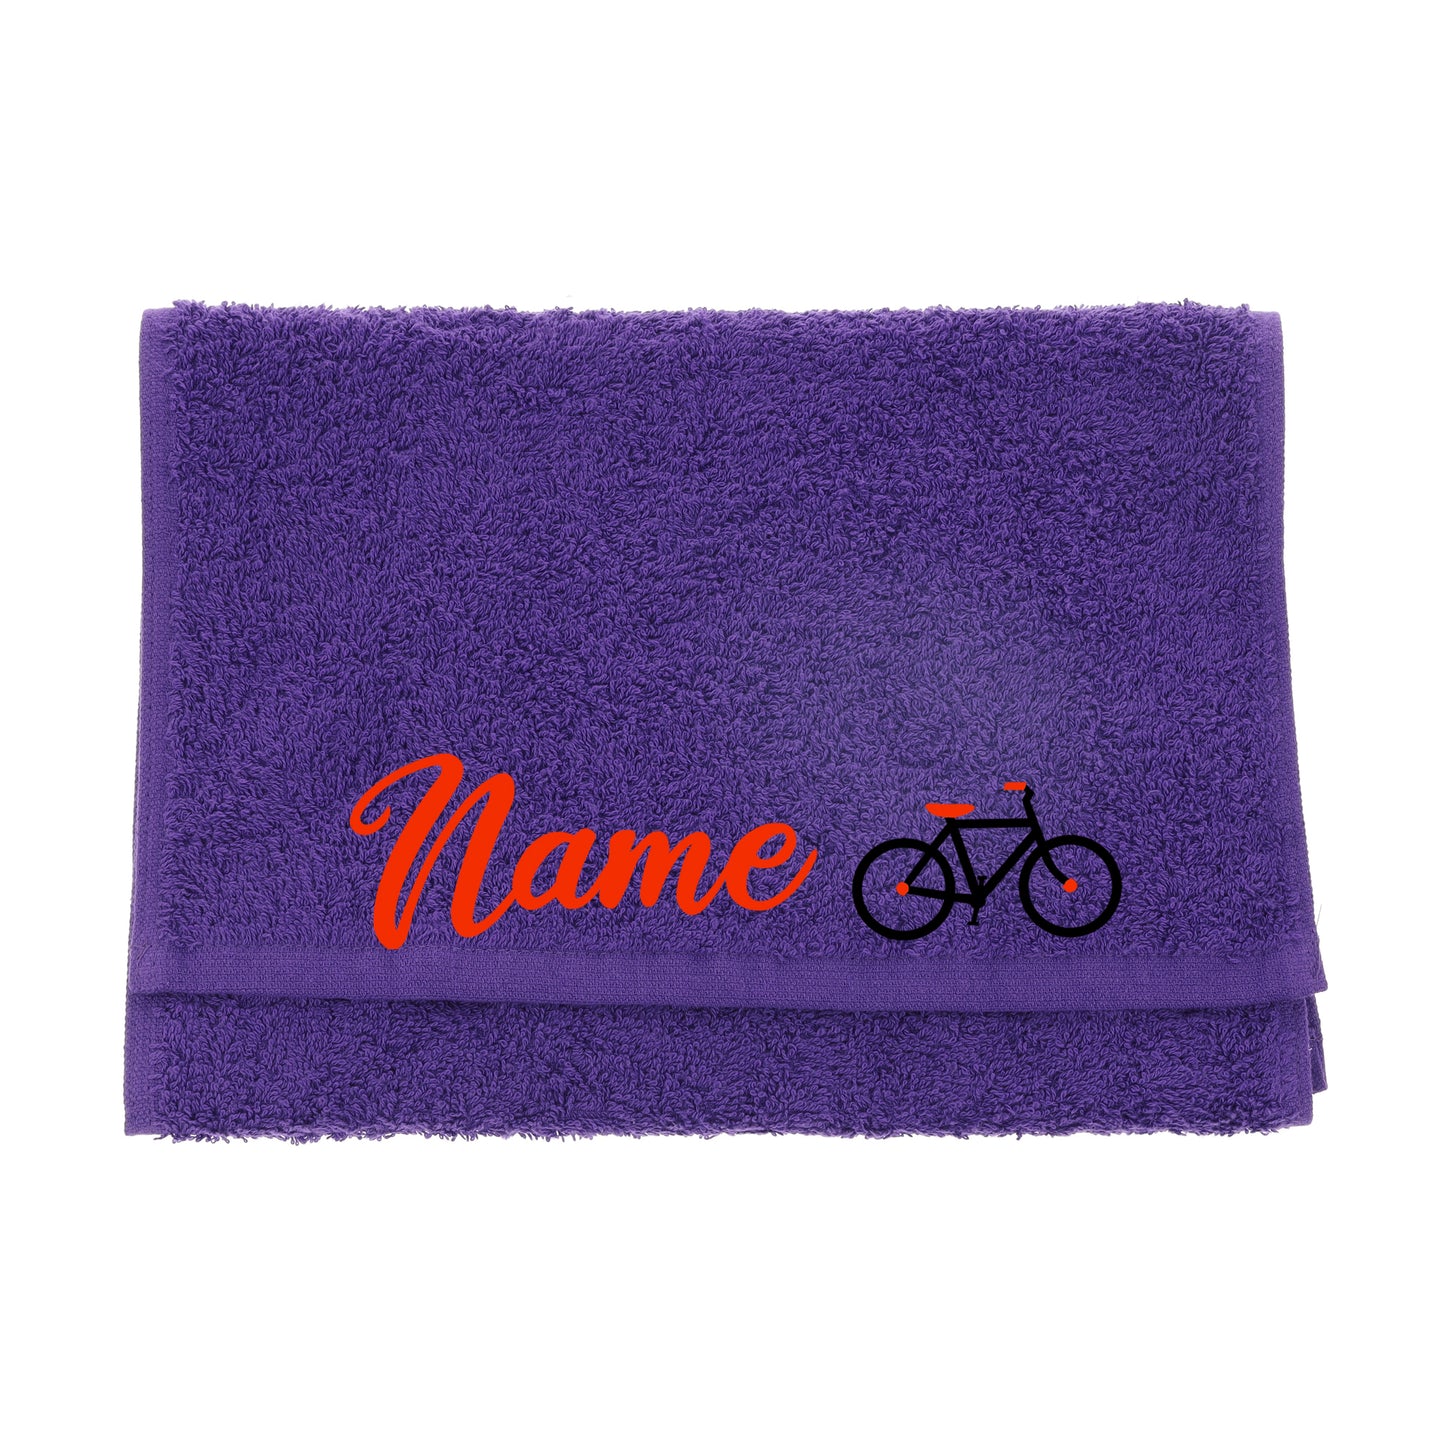 Personalised Embroidered Gym Sweat Sports Towel  - Always Looking Good - Purple  